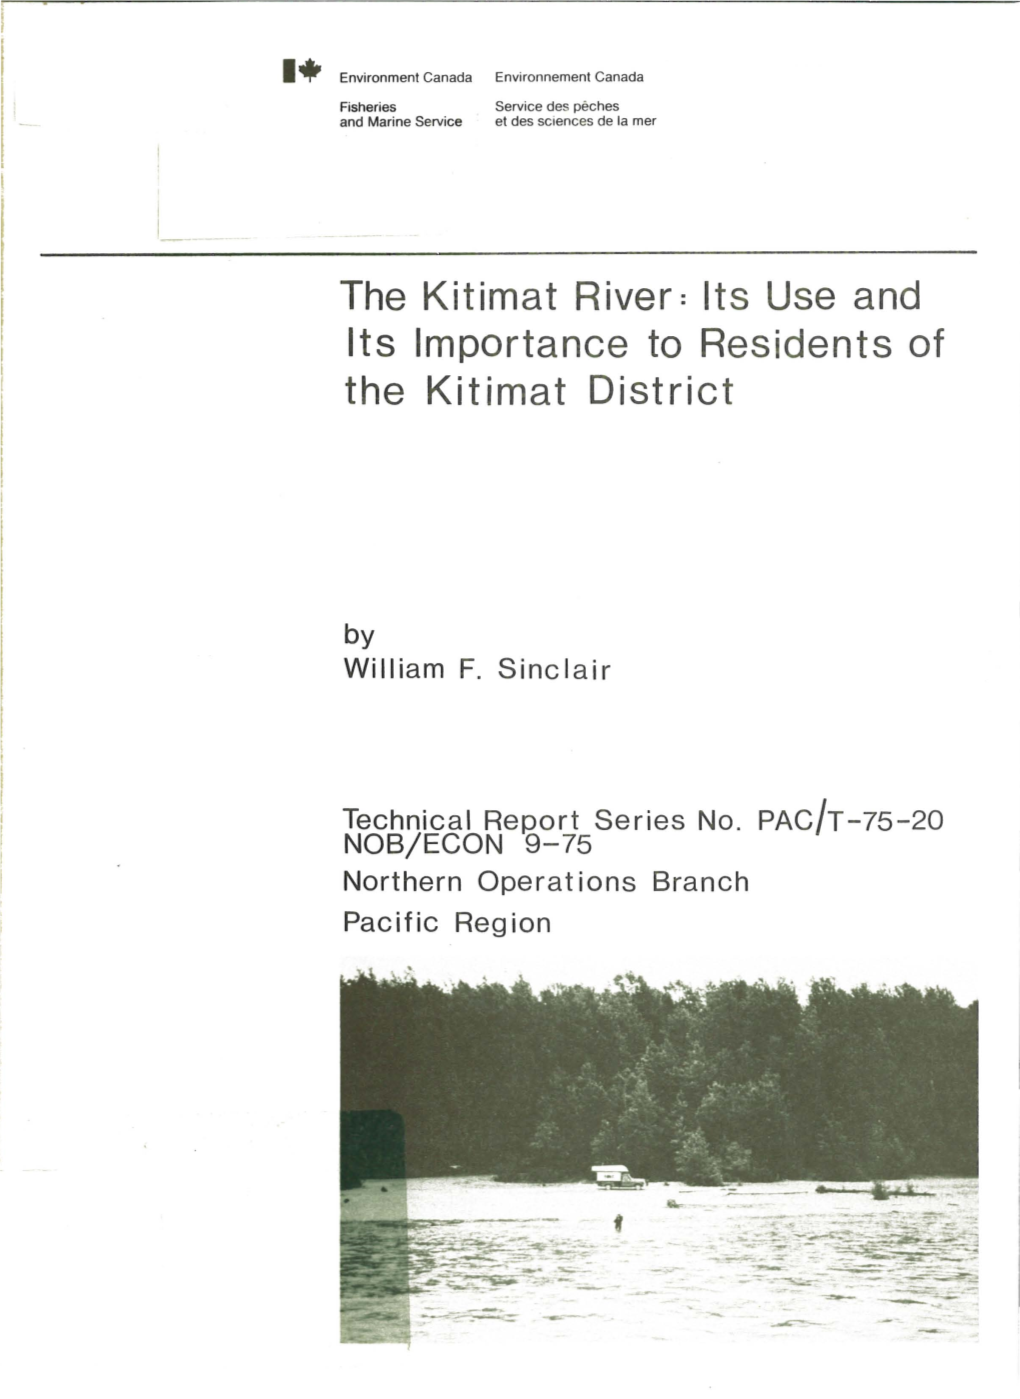 The Kitimat River: Its Use and Its Importance to Residents of the Kitimat District